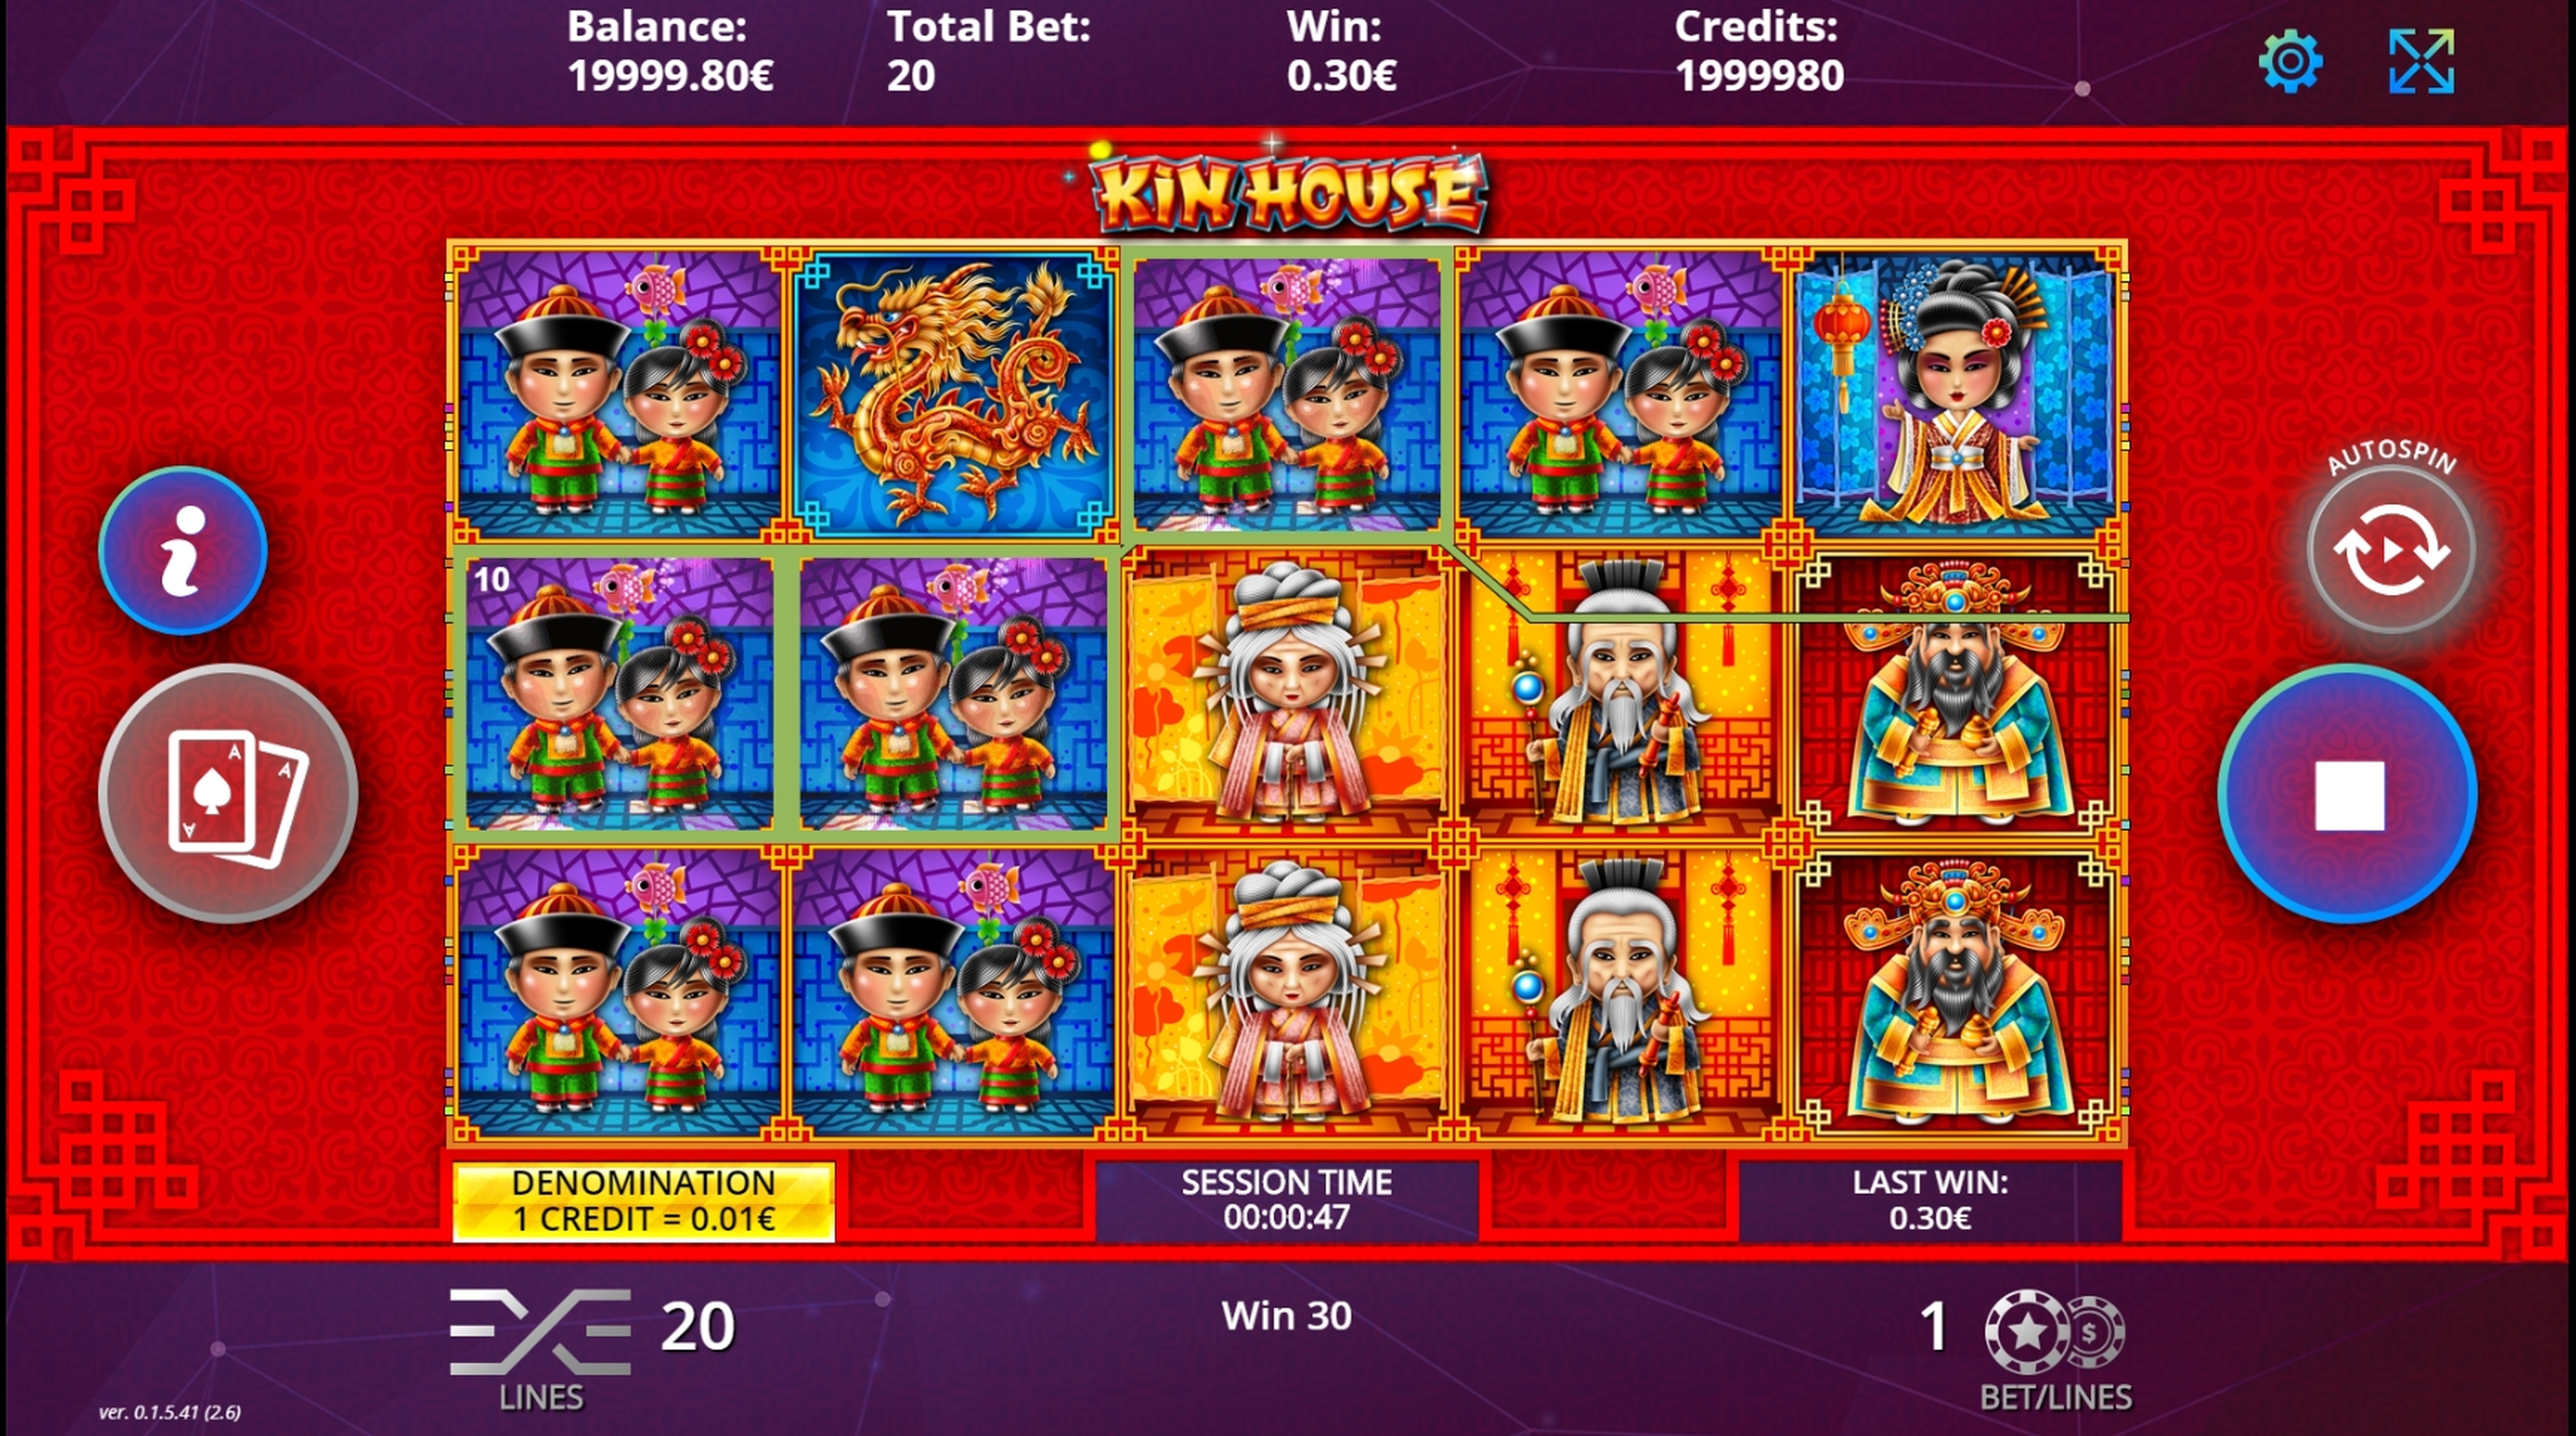 Win Money in Kin House Free Slot Game by DLV